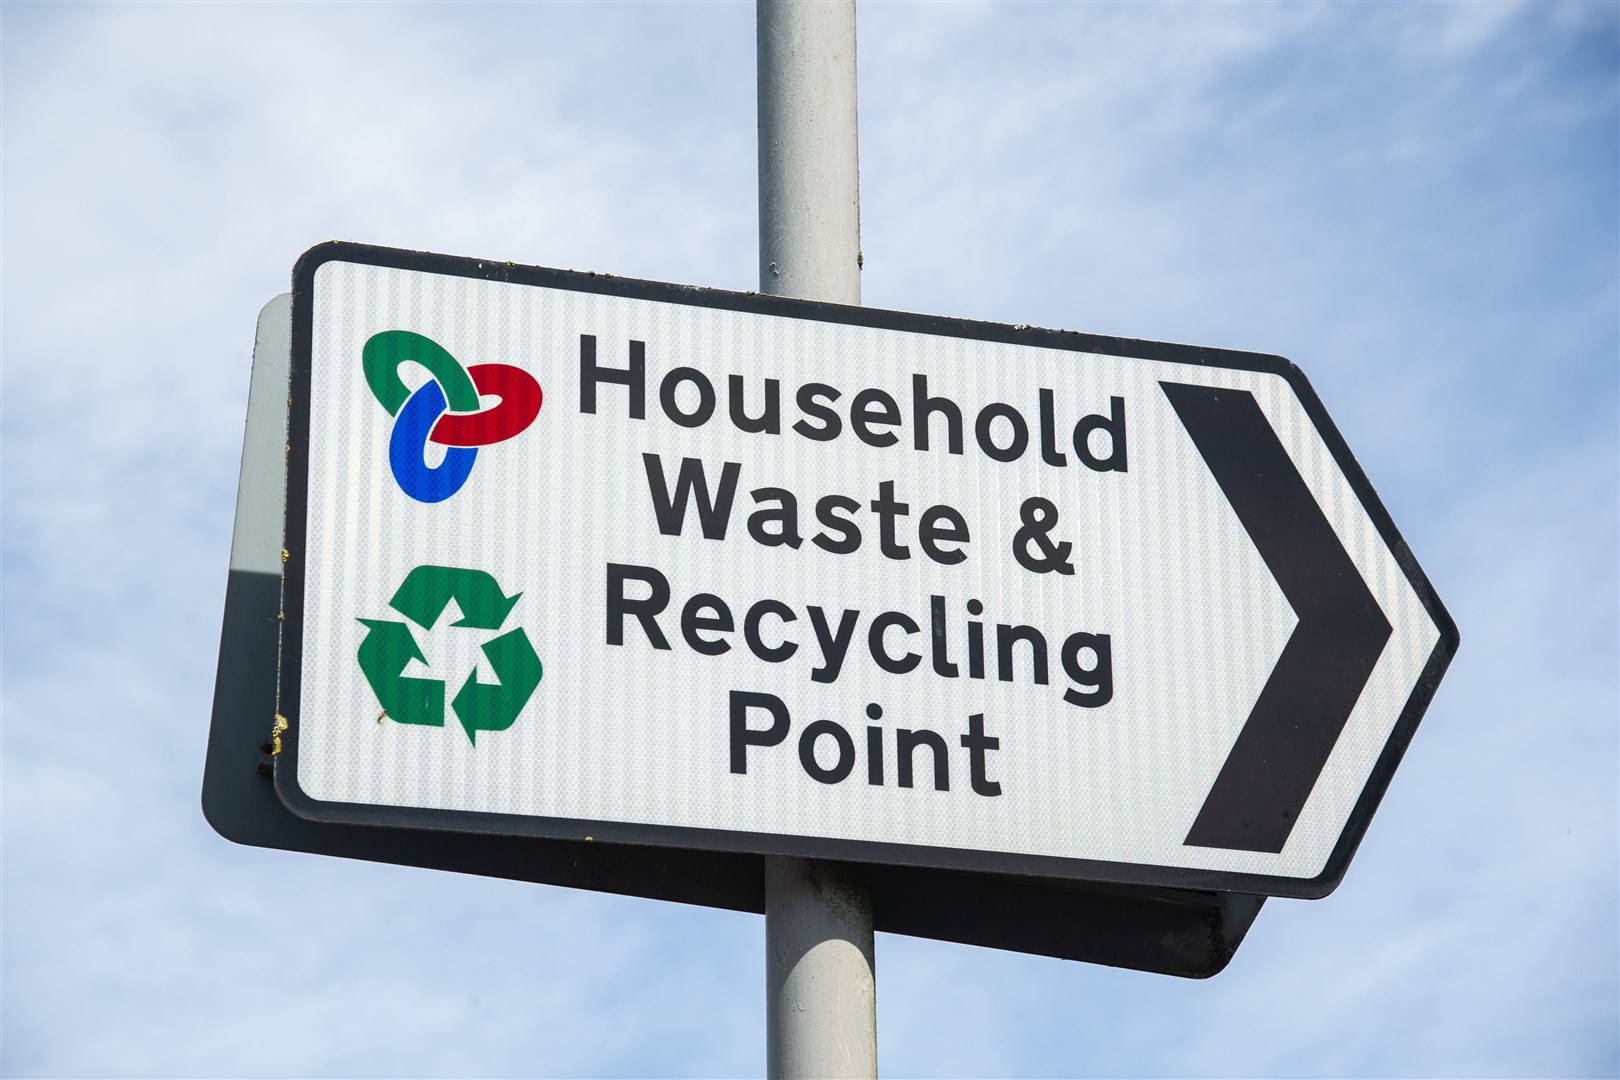 Changes at the recycling centres.